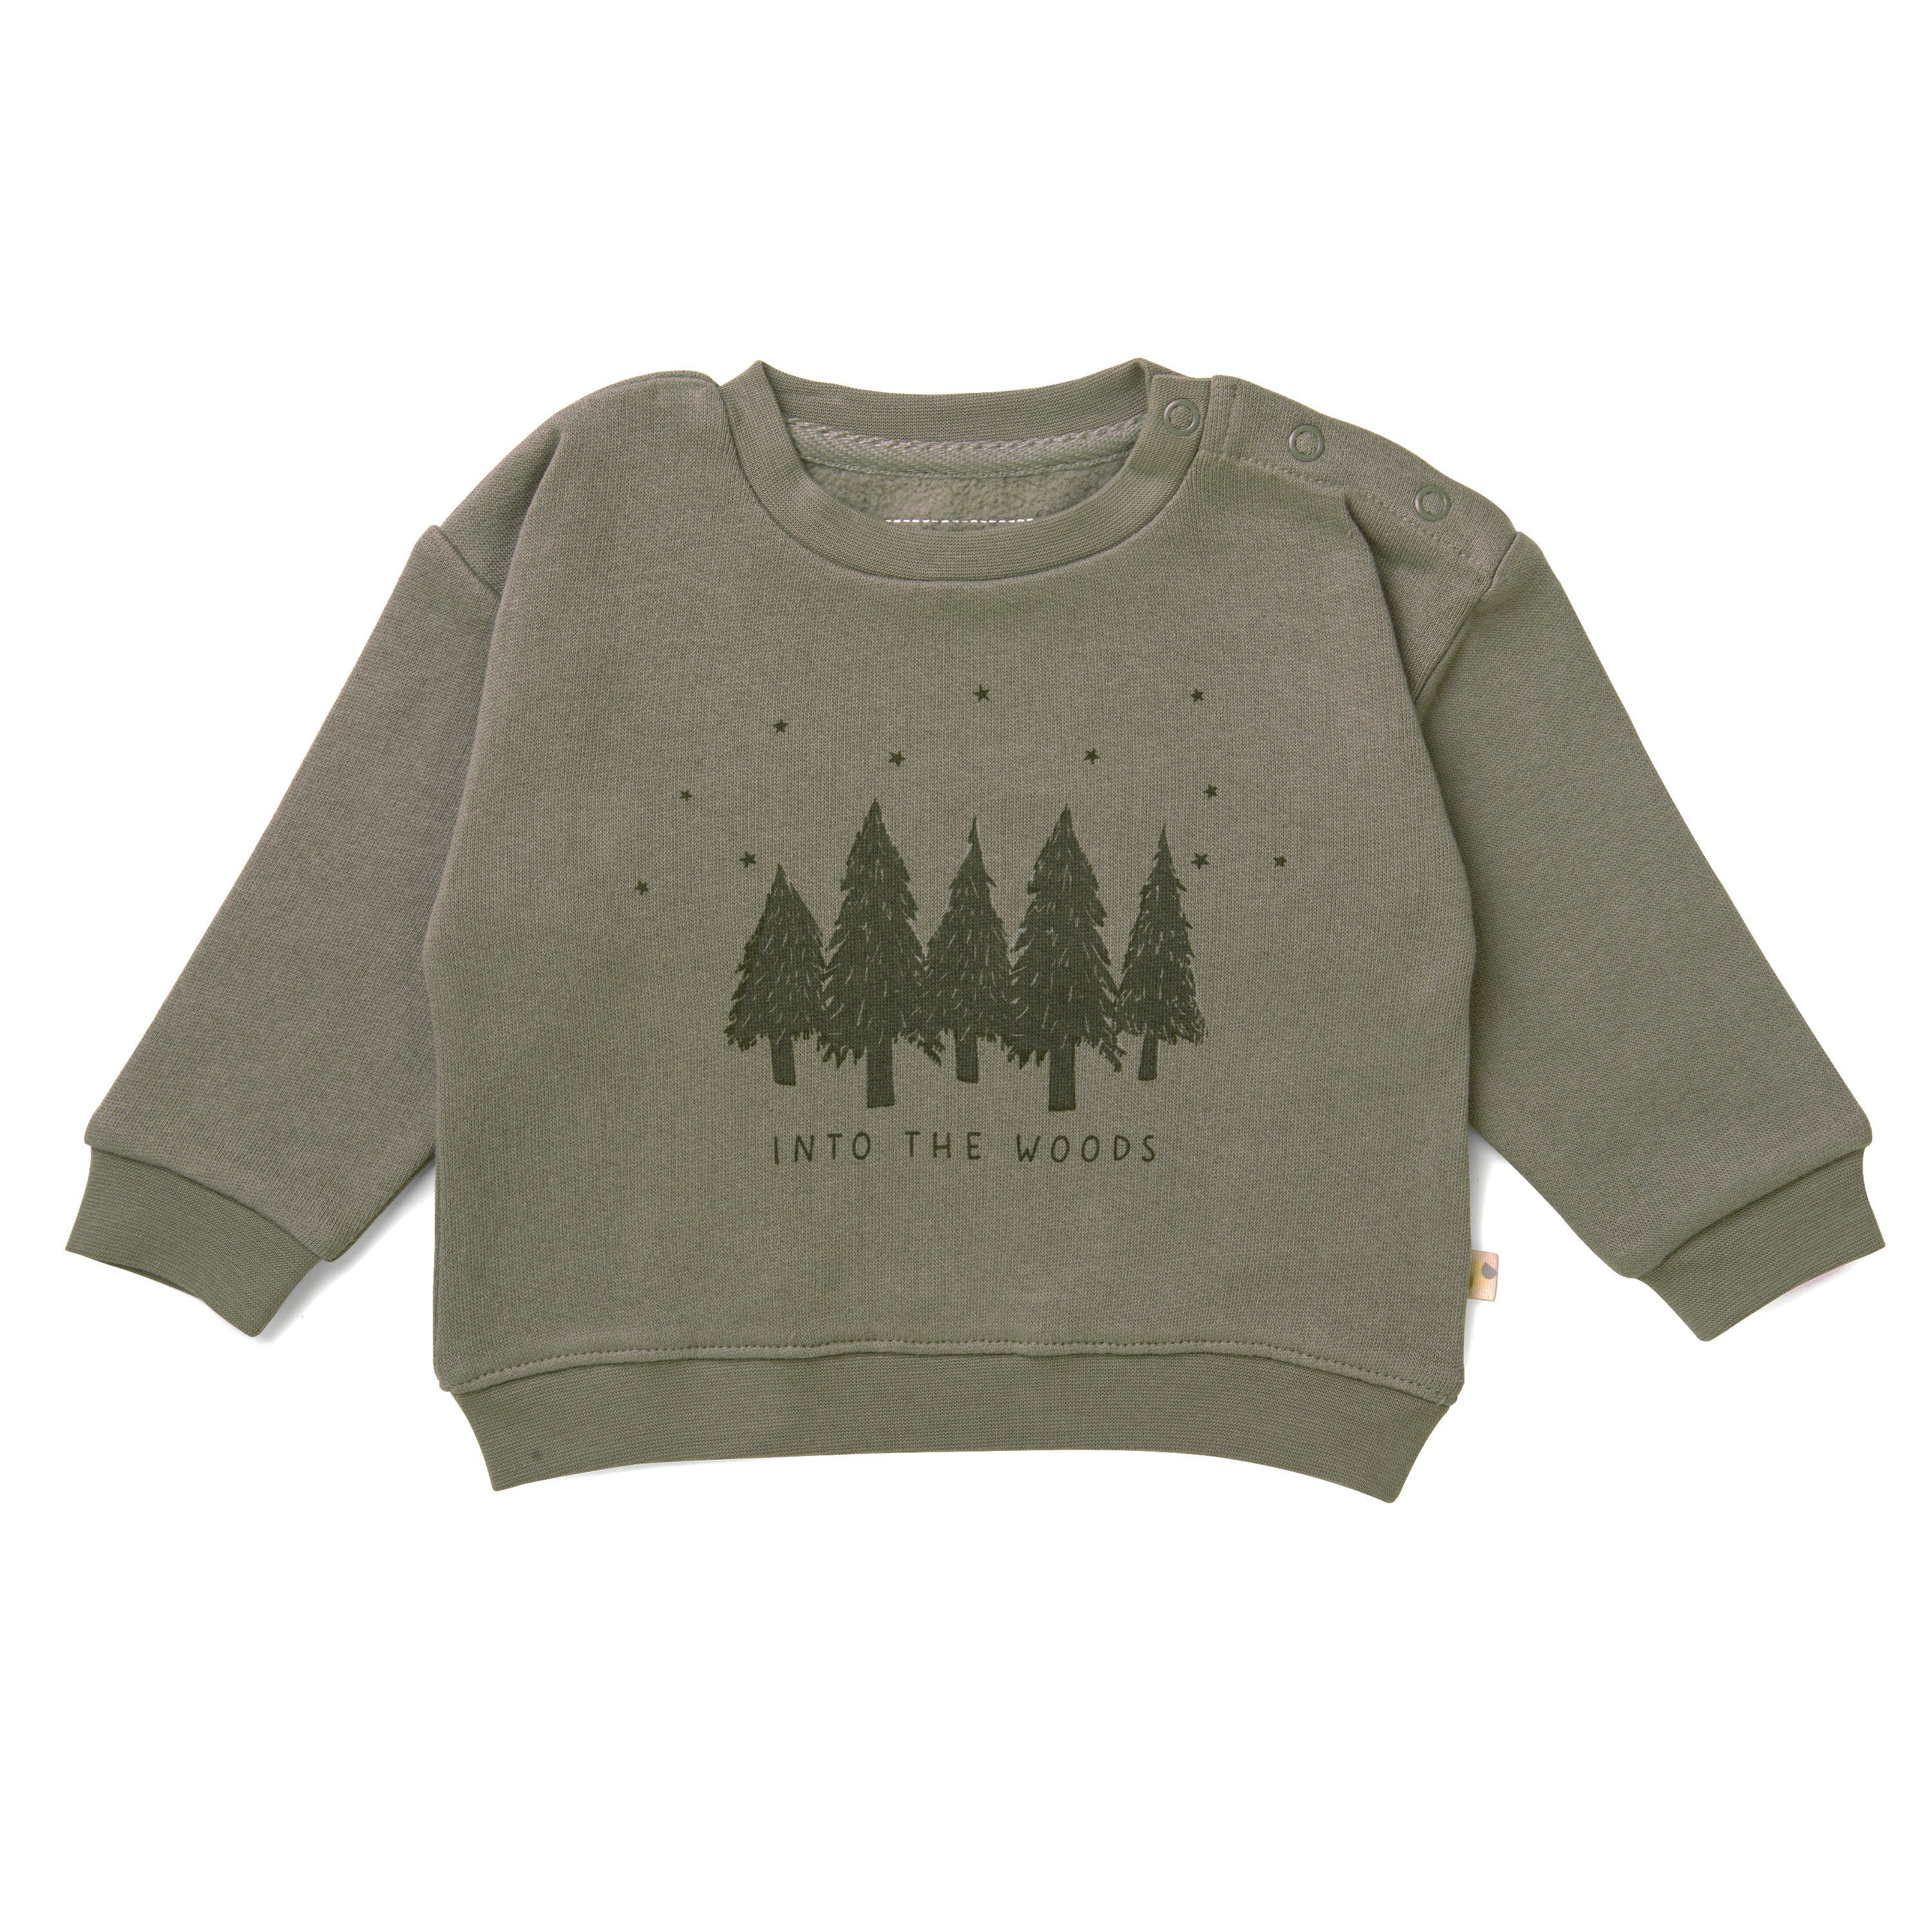 Organic Baby olive green toddler sweatshirt featuring a row of pine trees and the phrase "into the woods" printed on the front, displayed on a plain white background.